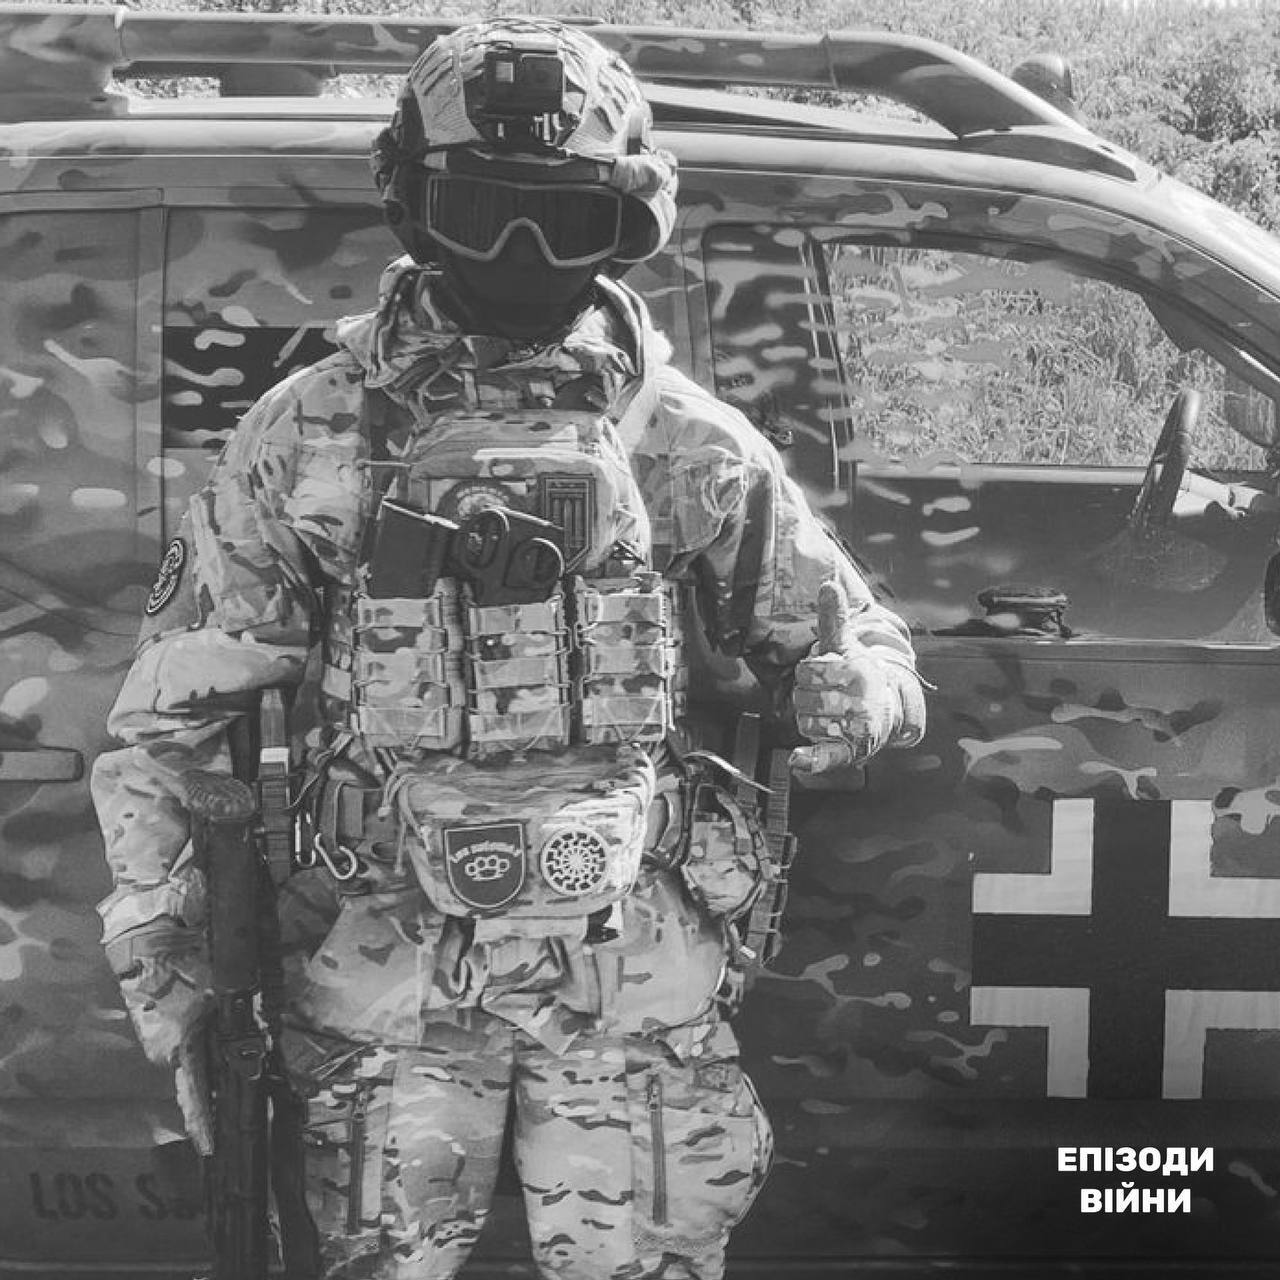 ''There was not a living spot on his body, but he was smiling'': a squad leader tells about the risky evacuation of the 3rd Brigade near Bakhmut